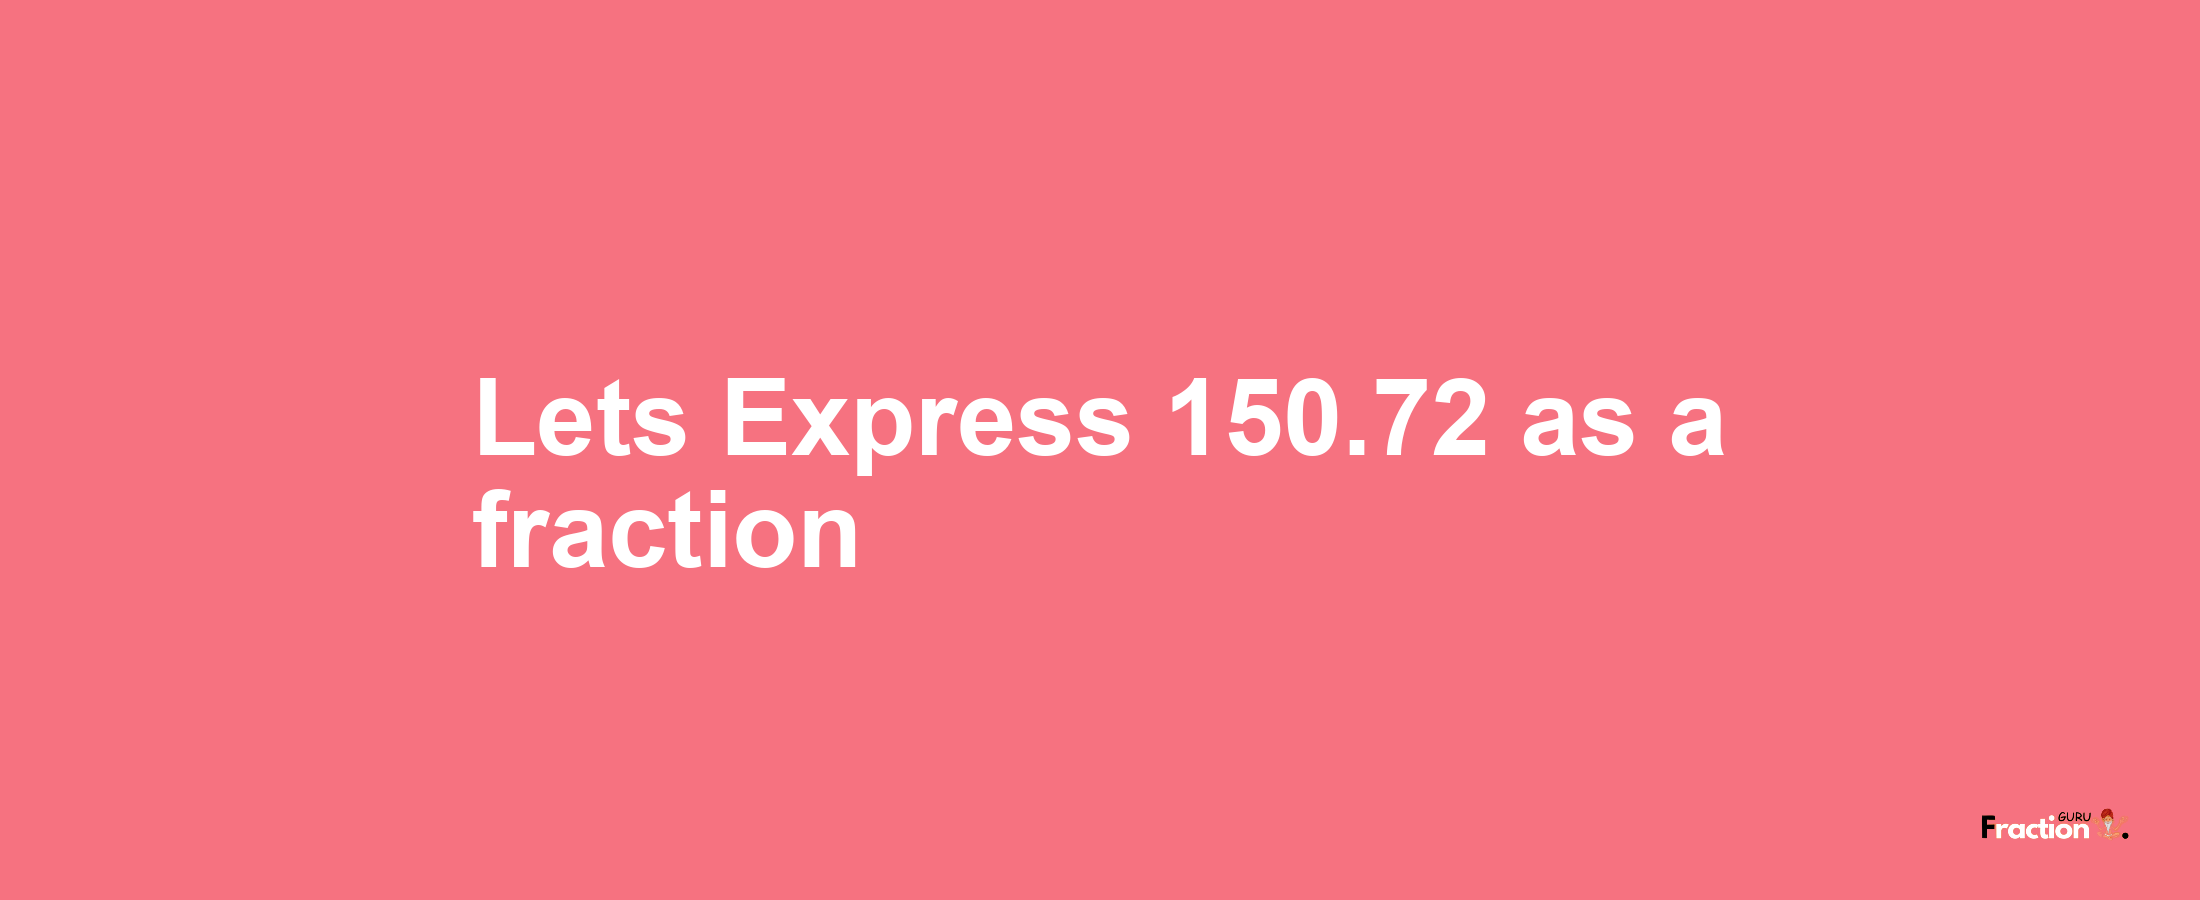 Lets Express 150.72 as afraction